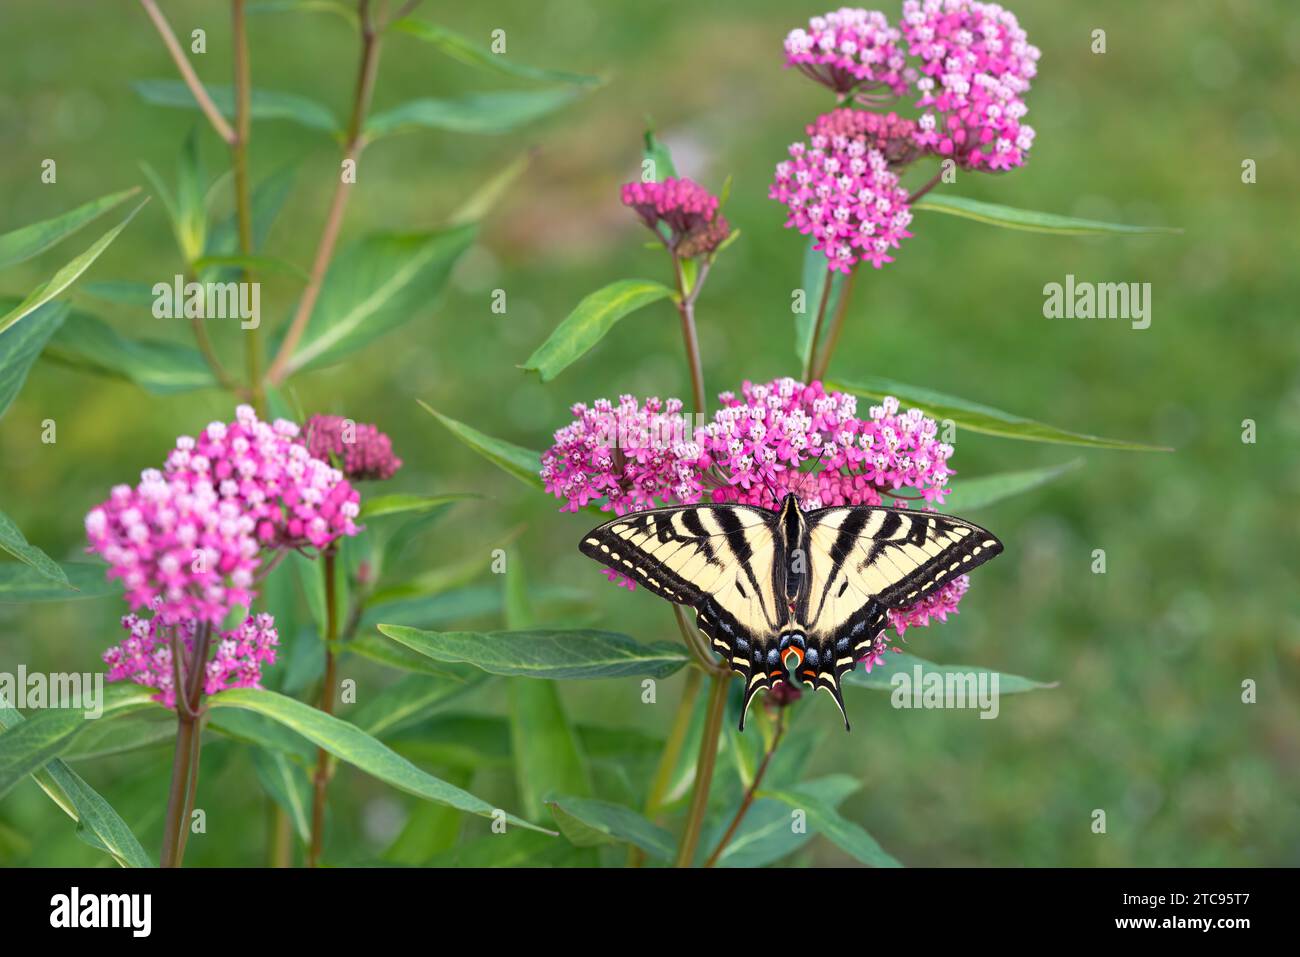 Macro of a western tiger swallowtail butterfly (papilio rutulus) on a rose swamp milkweed (asclepias) flower. Top view with wings spread open. Stock Photo